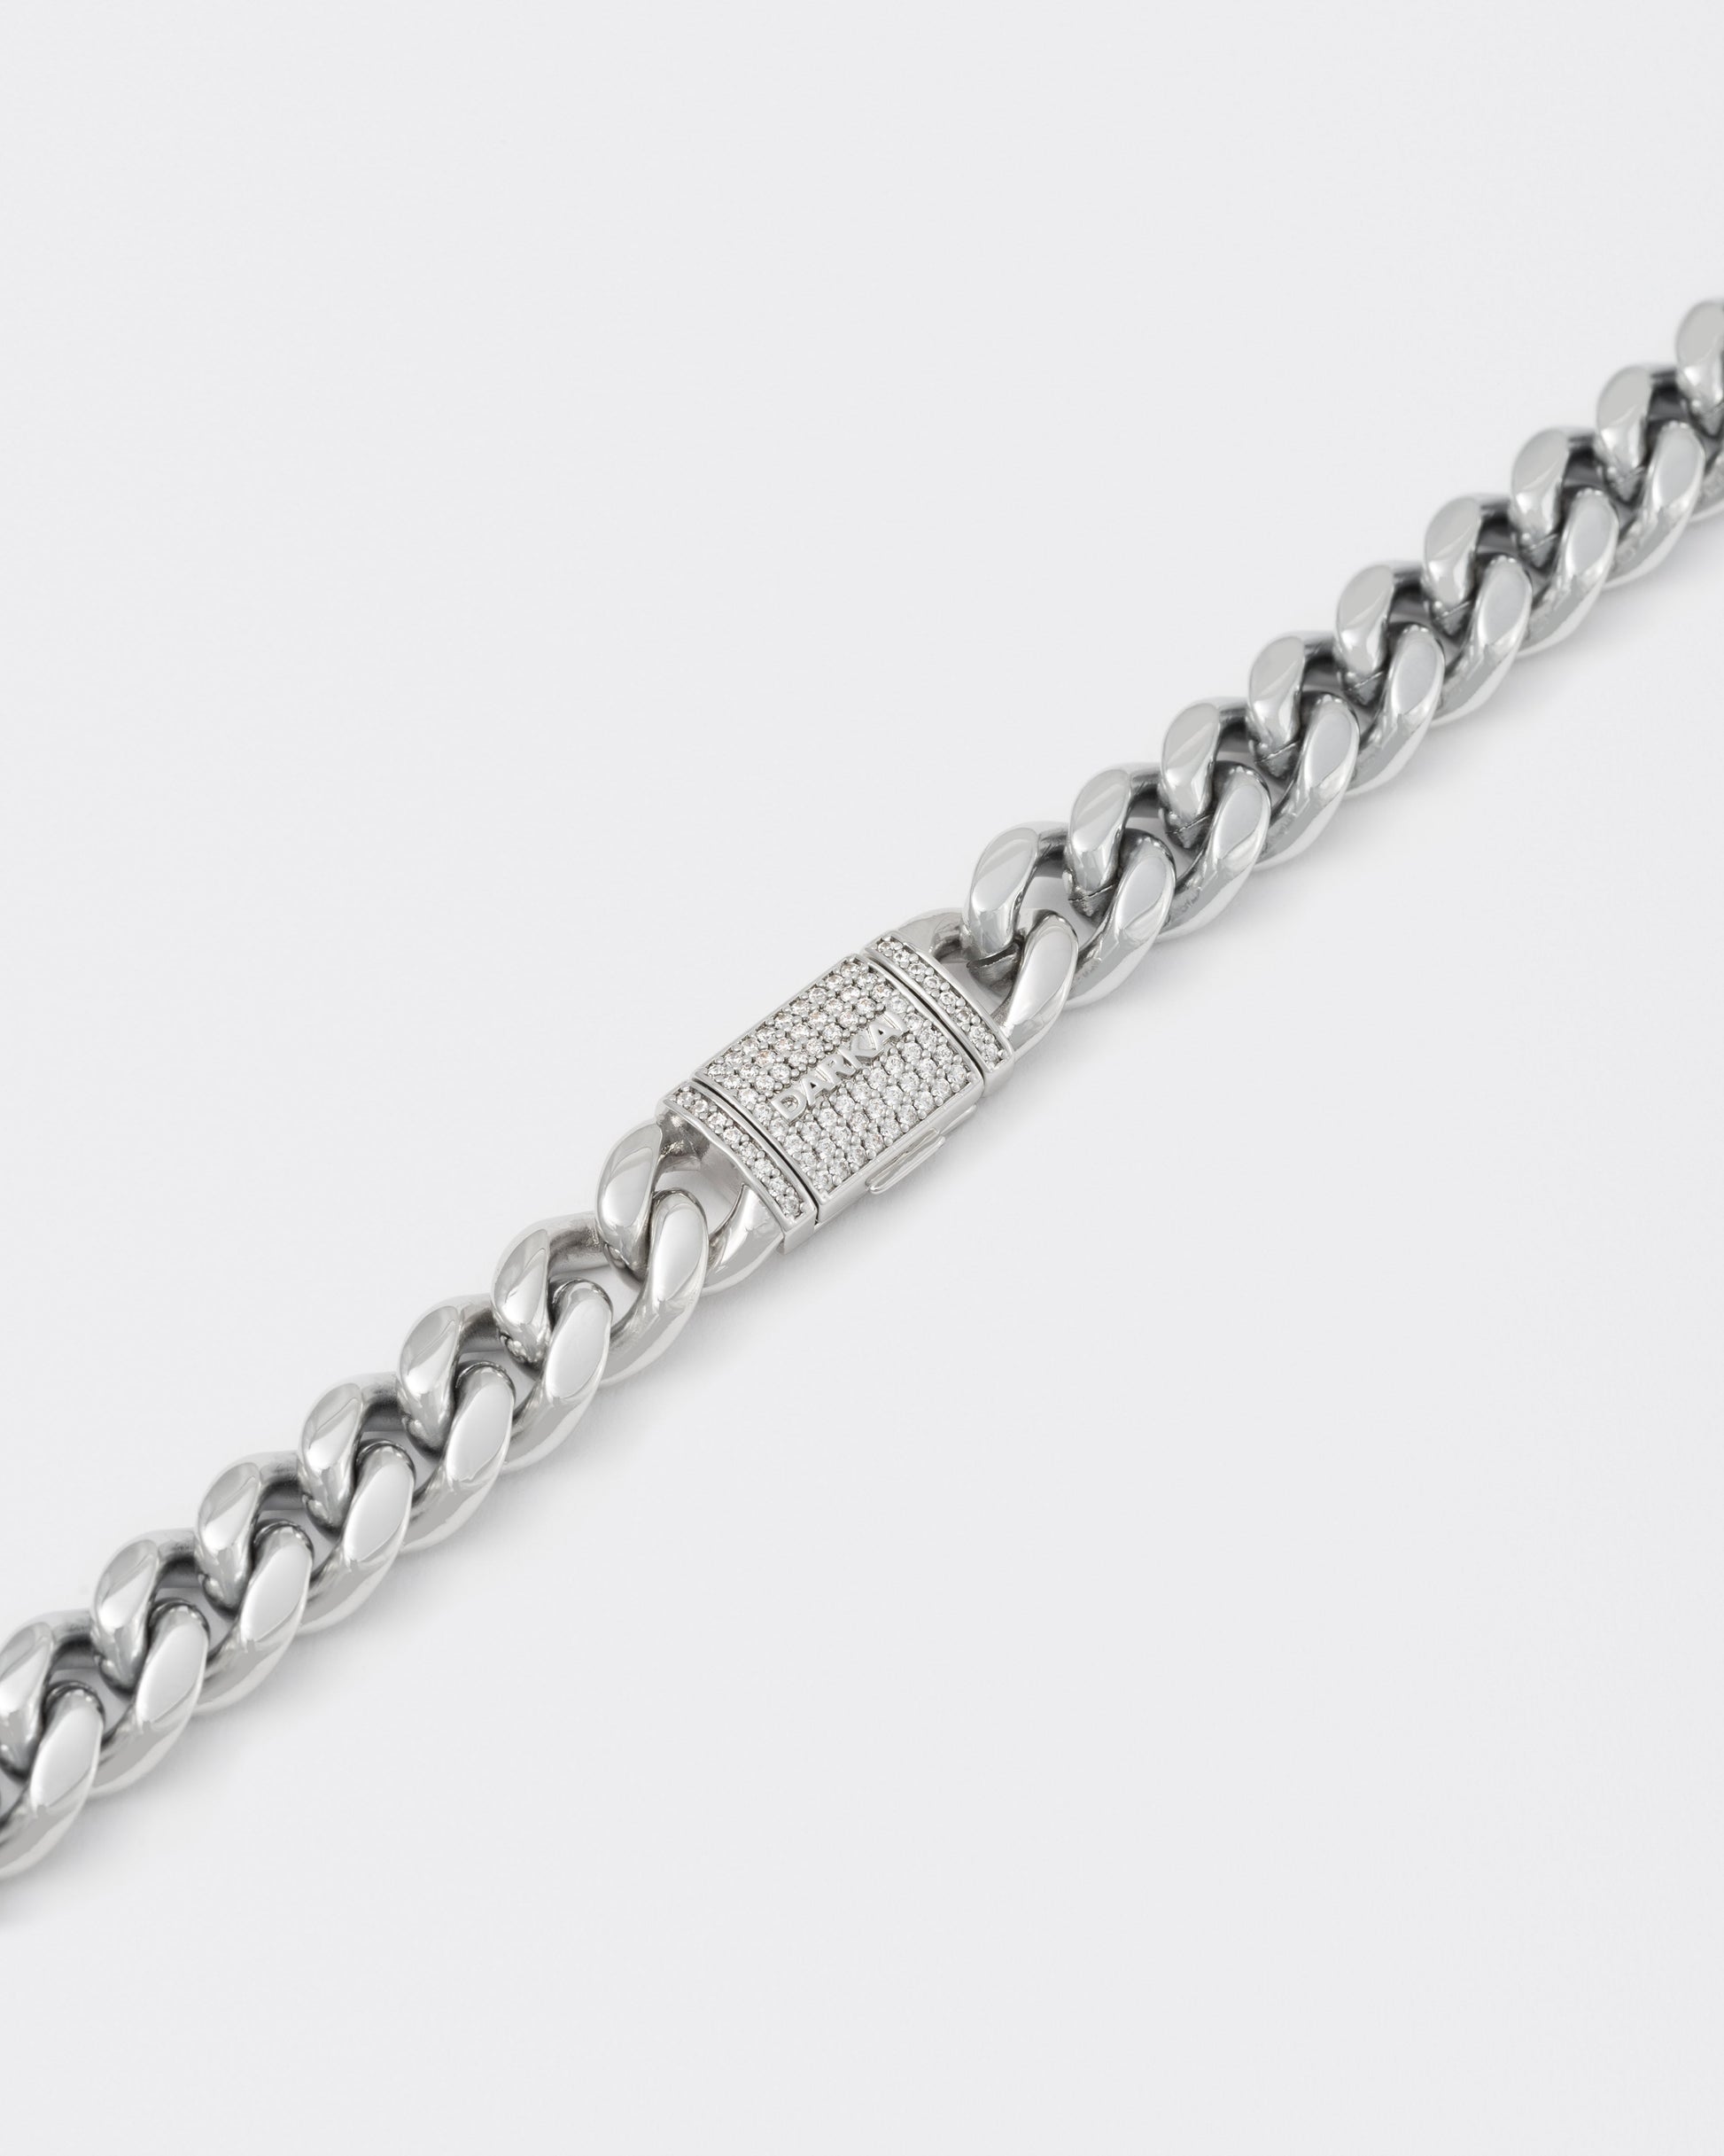 detail of 18k white gold coated cuban chain necklace with hand-set micropavé stones in white